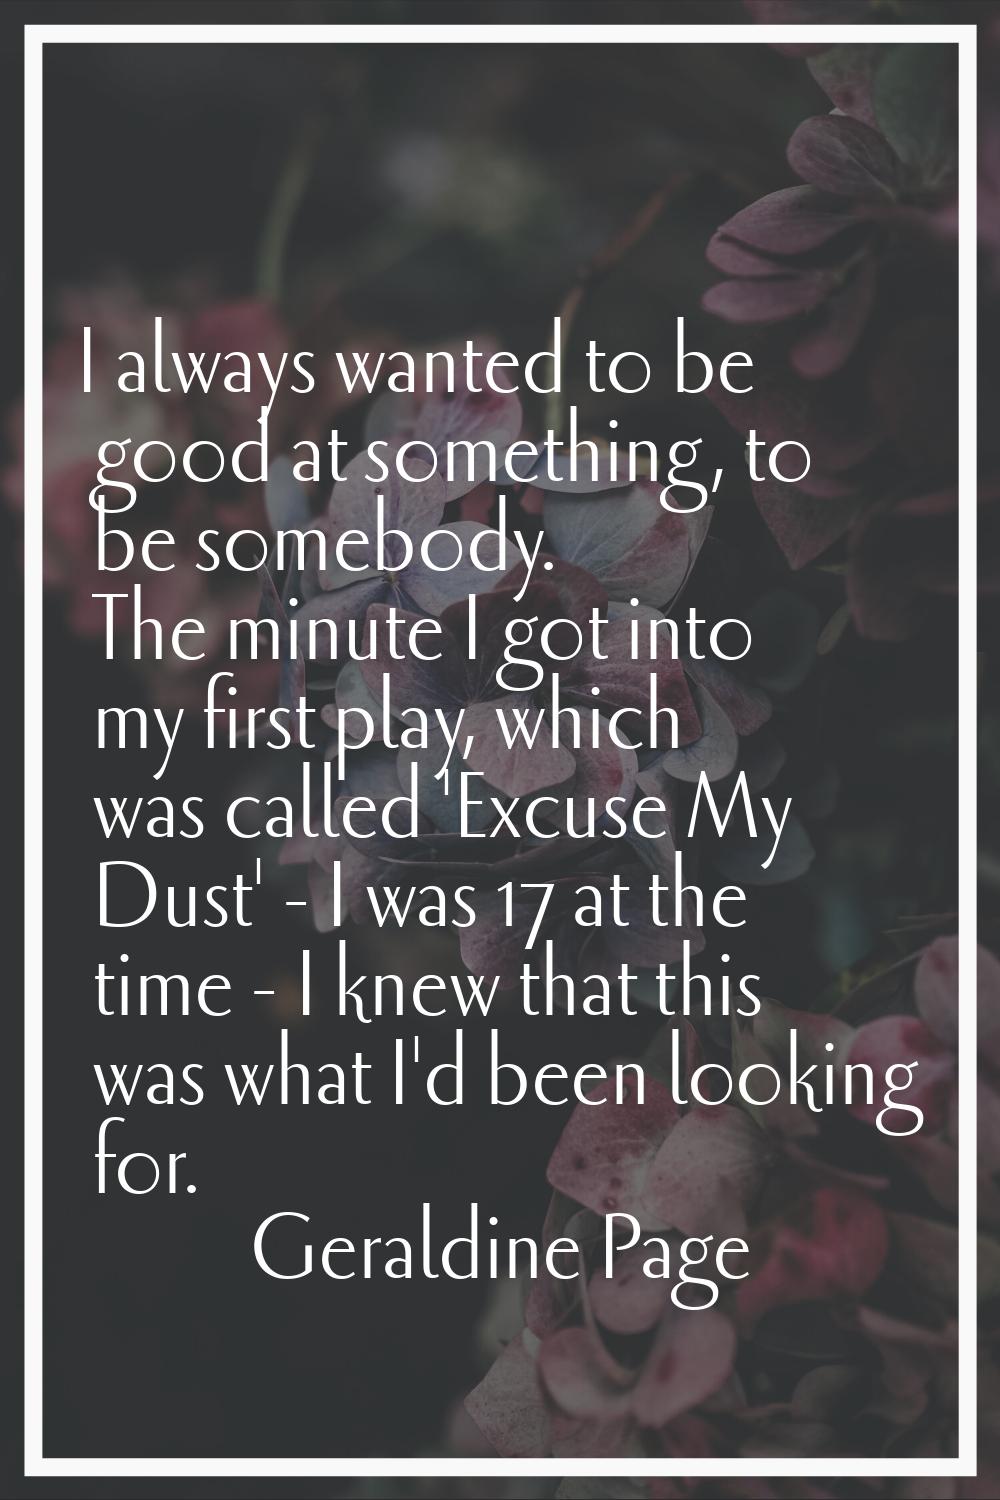 I always wanted to be good at something, to be somebody. The minute I got into my first play, which